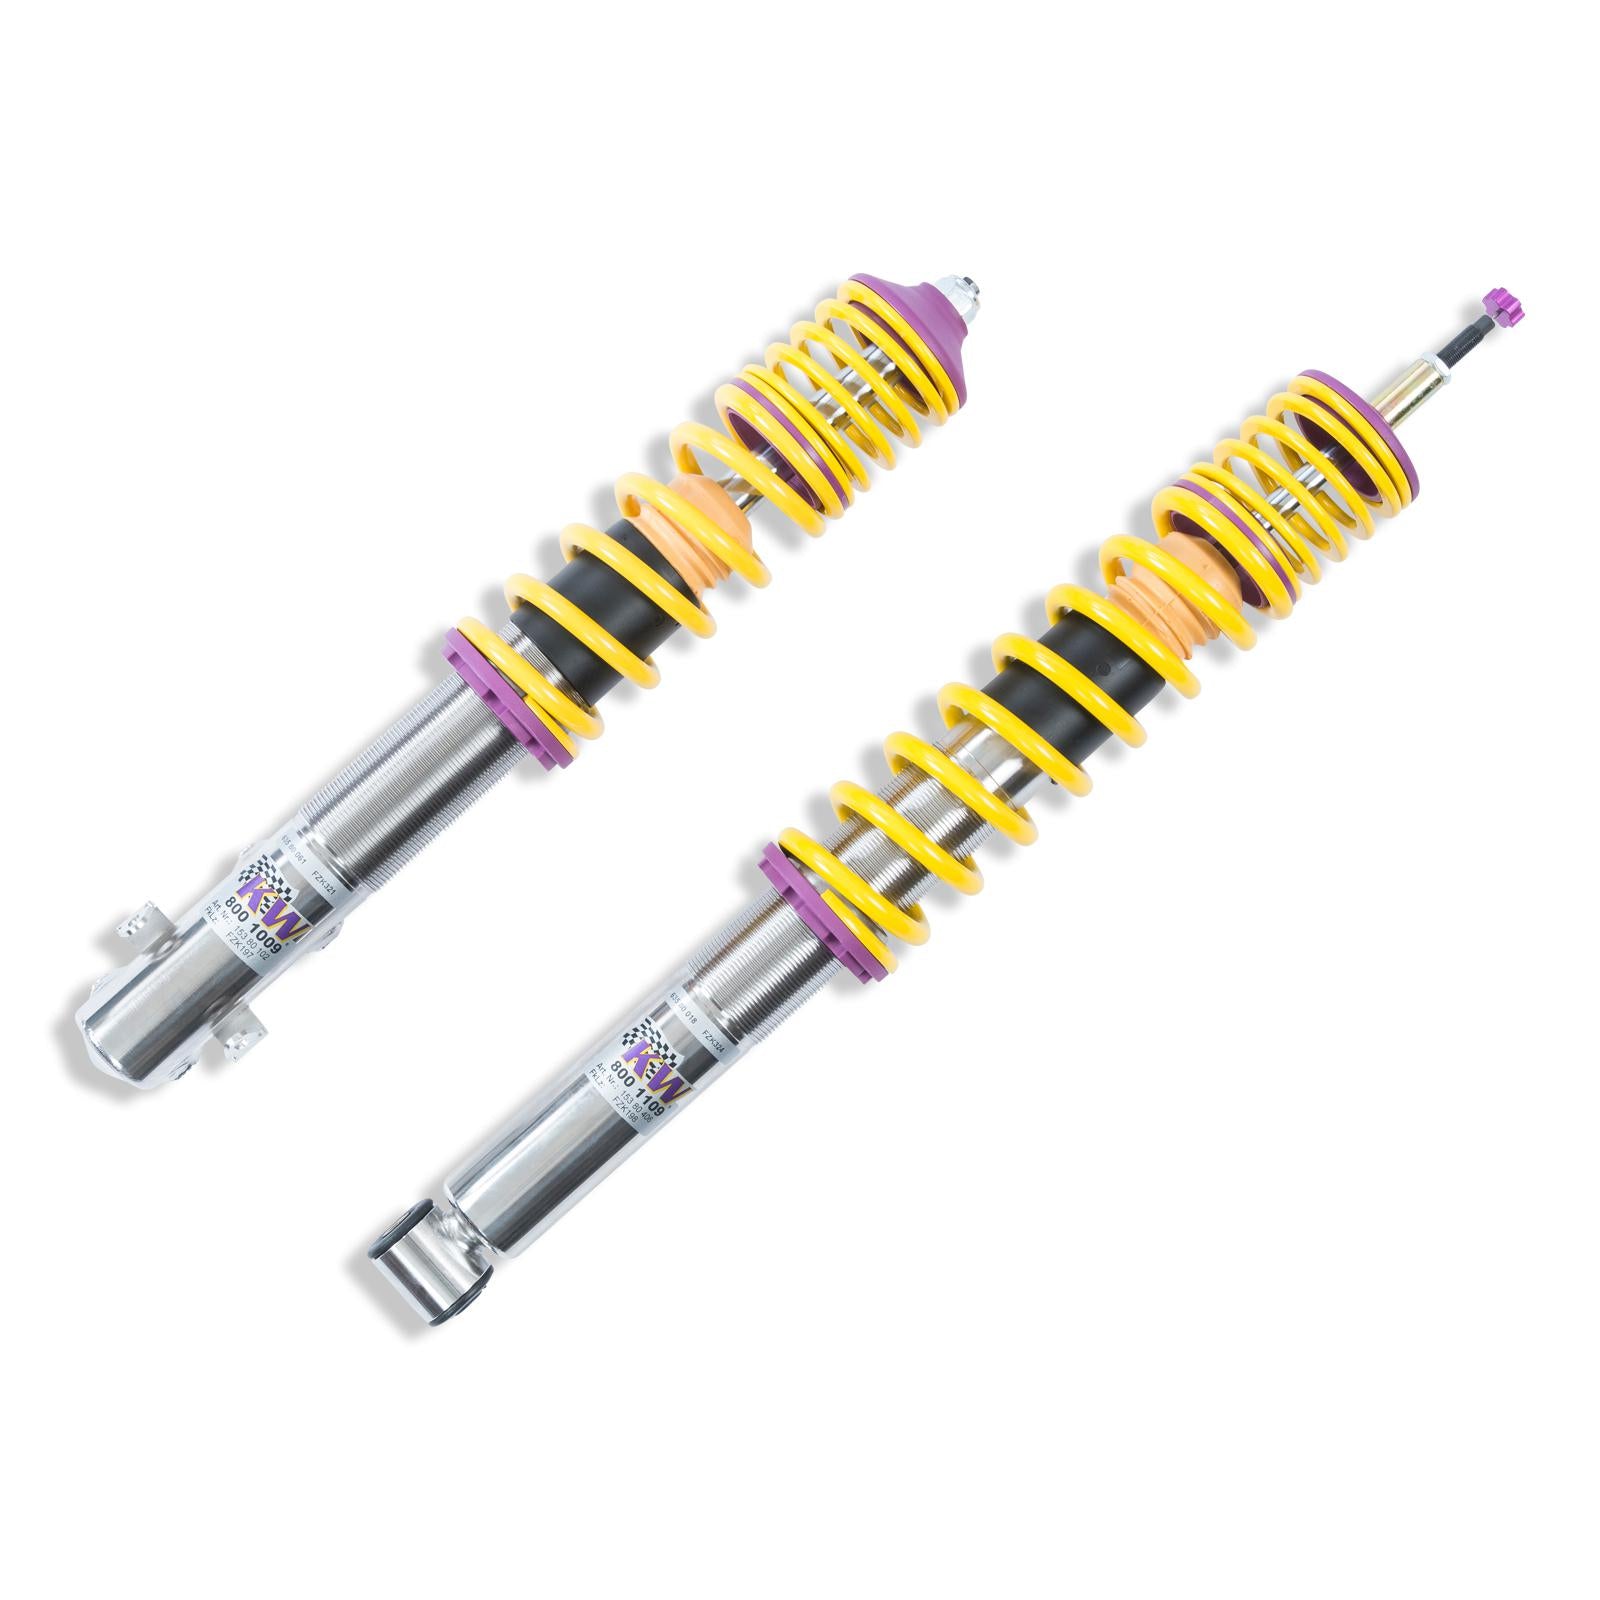 KW Audi B7 B8 B8.5 Variant 2 Coilover kit (A4 & A5) - Inc. Deactivation For Electronic Damper | ML Performance UK 